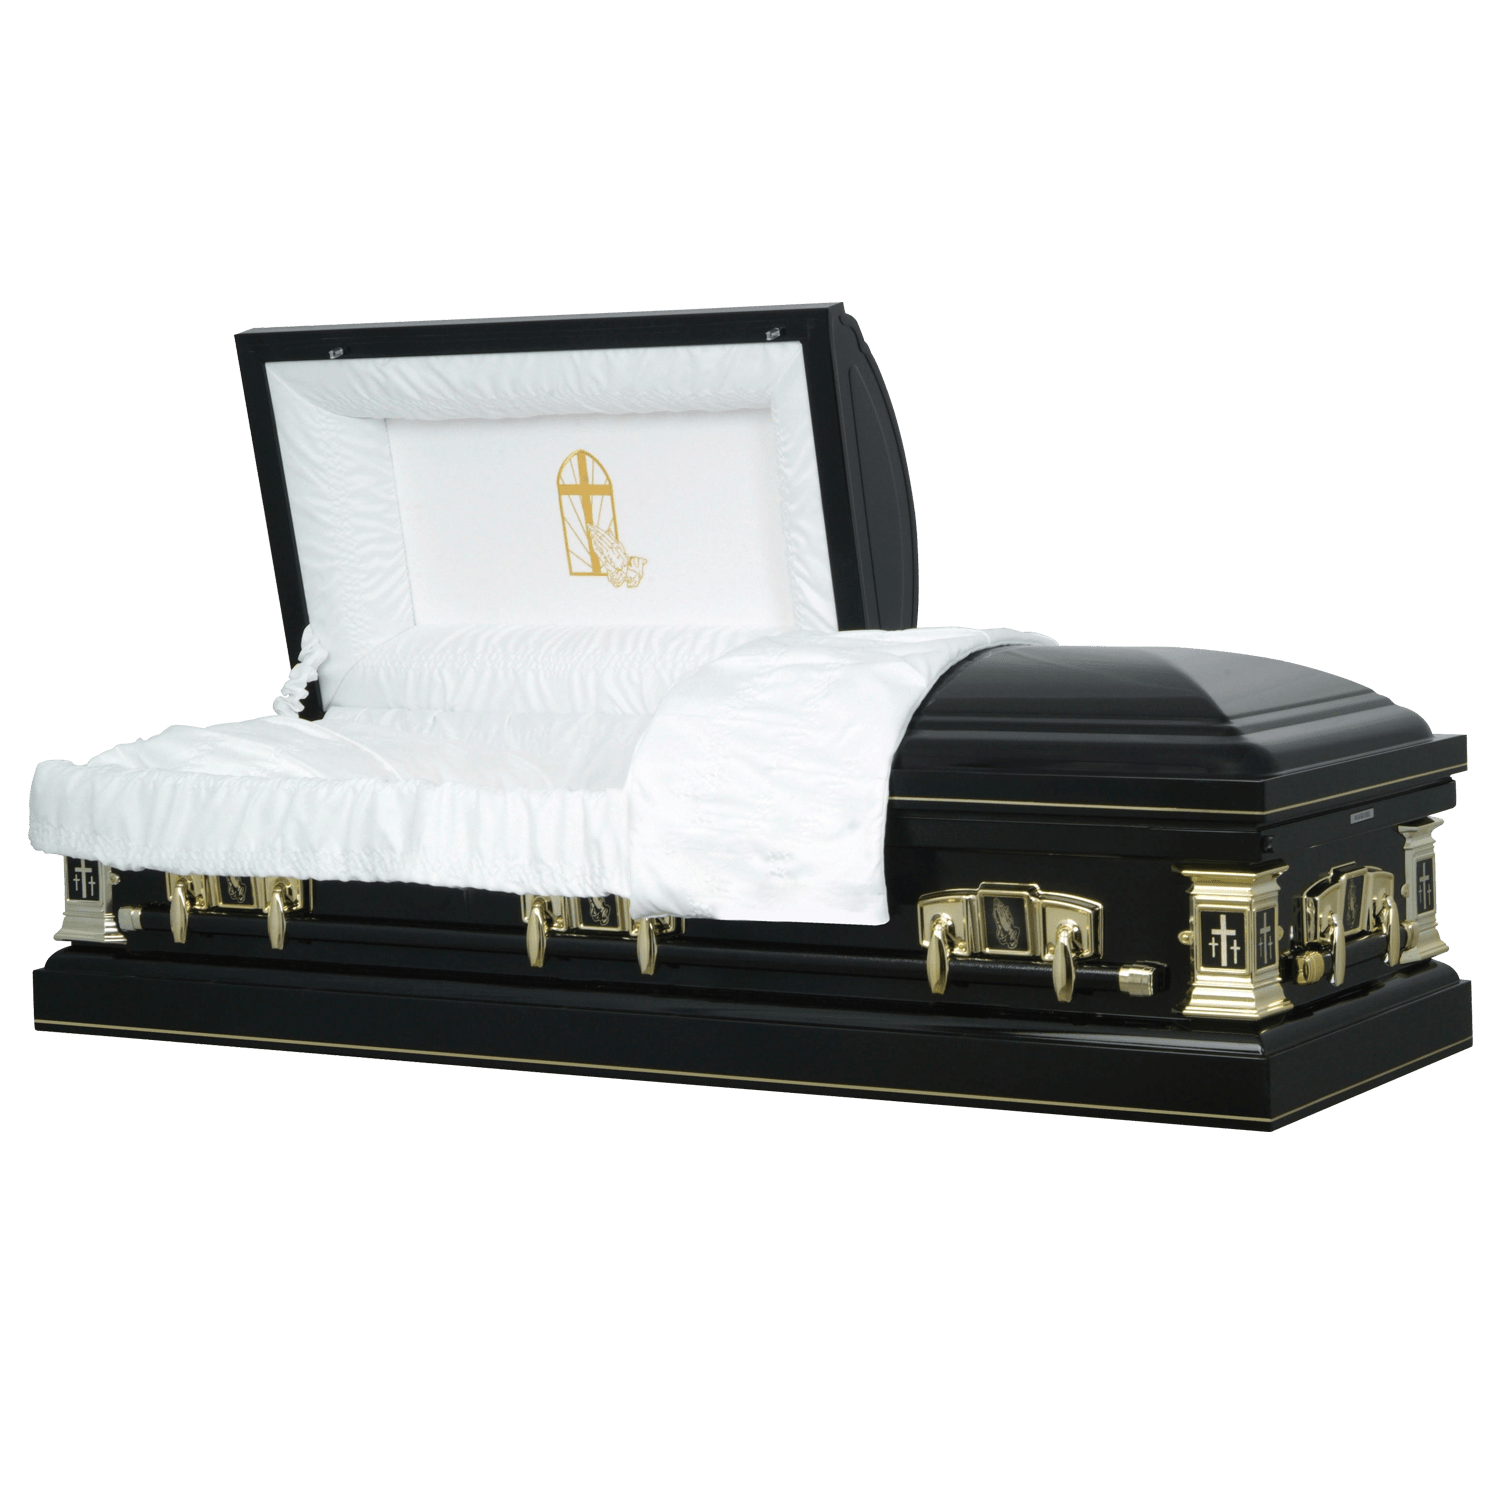 Only $1,799 - Titan Black and Gold Cross - Black Steel Religious Casket